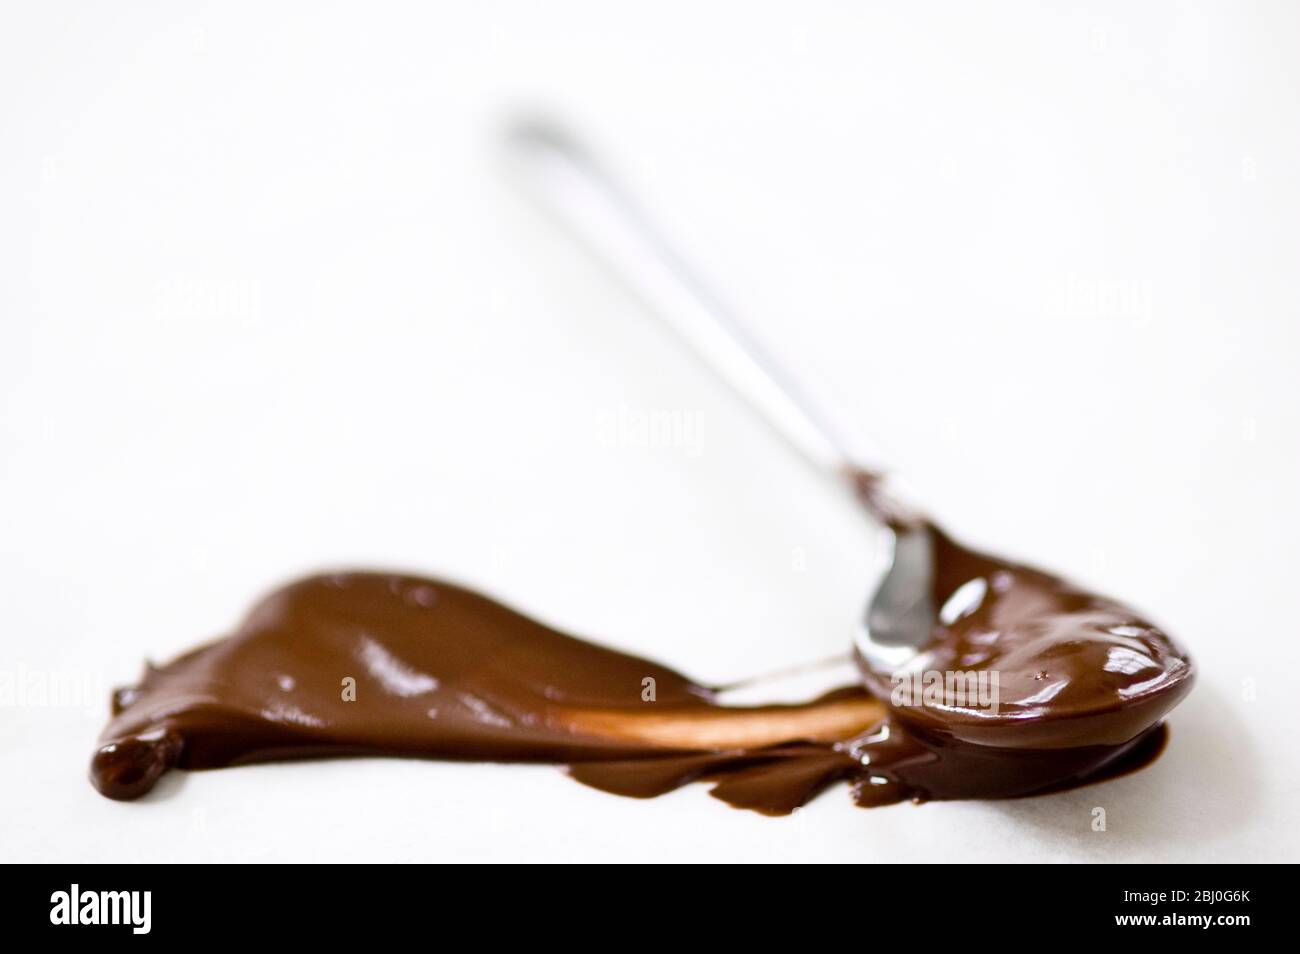 Melted chocolate smeared across white surface with a spoon leaving a plume shape. - Stock Photo